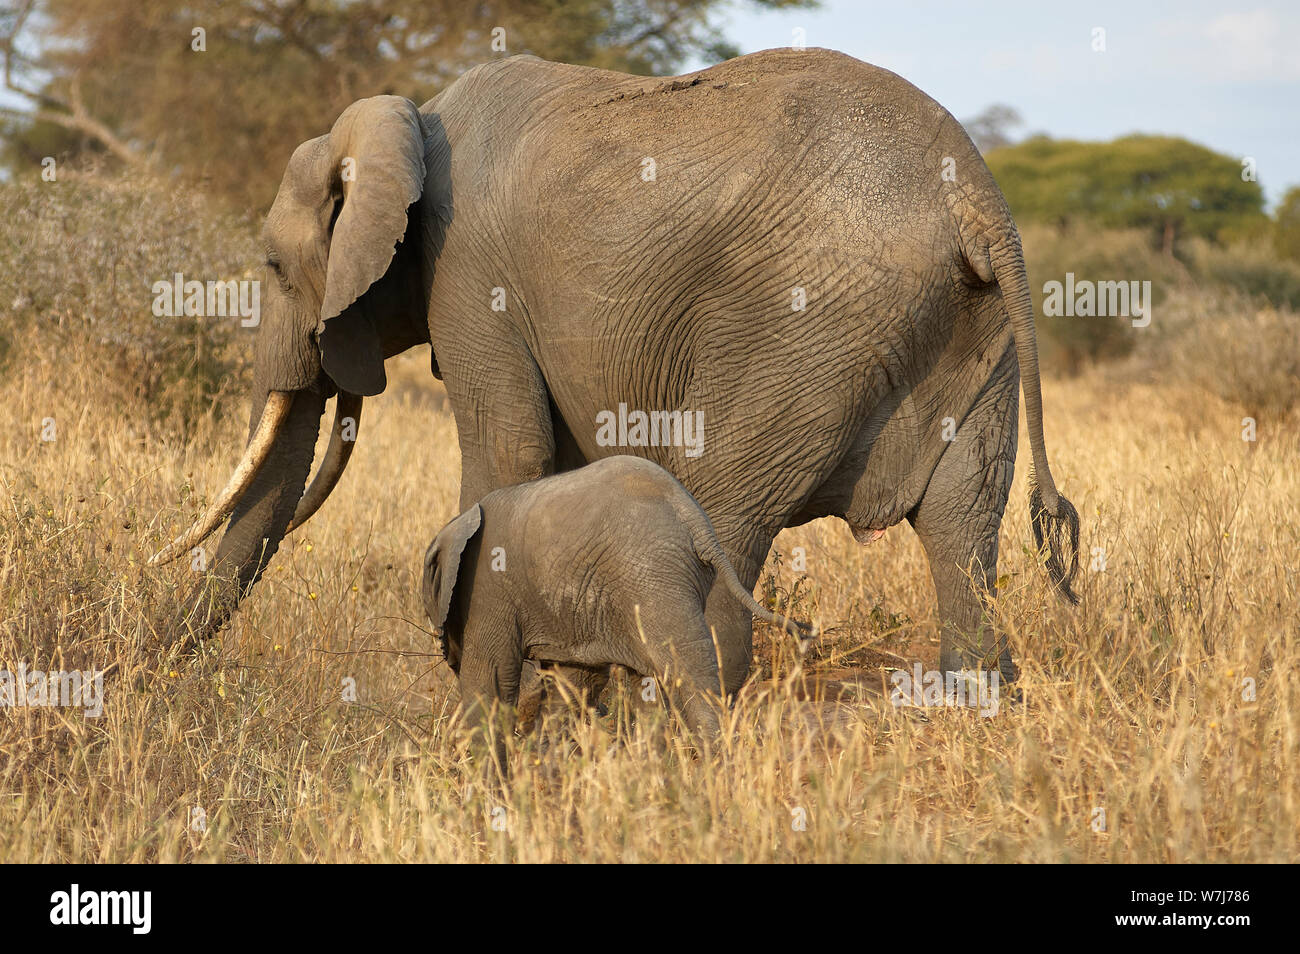 An elephant calf, staying close to its mother Stock Photo